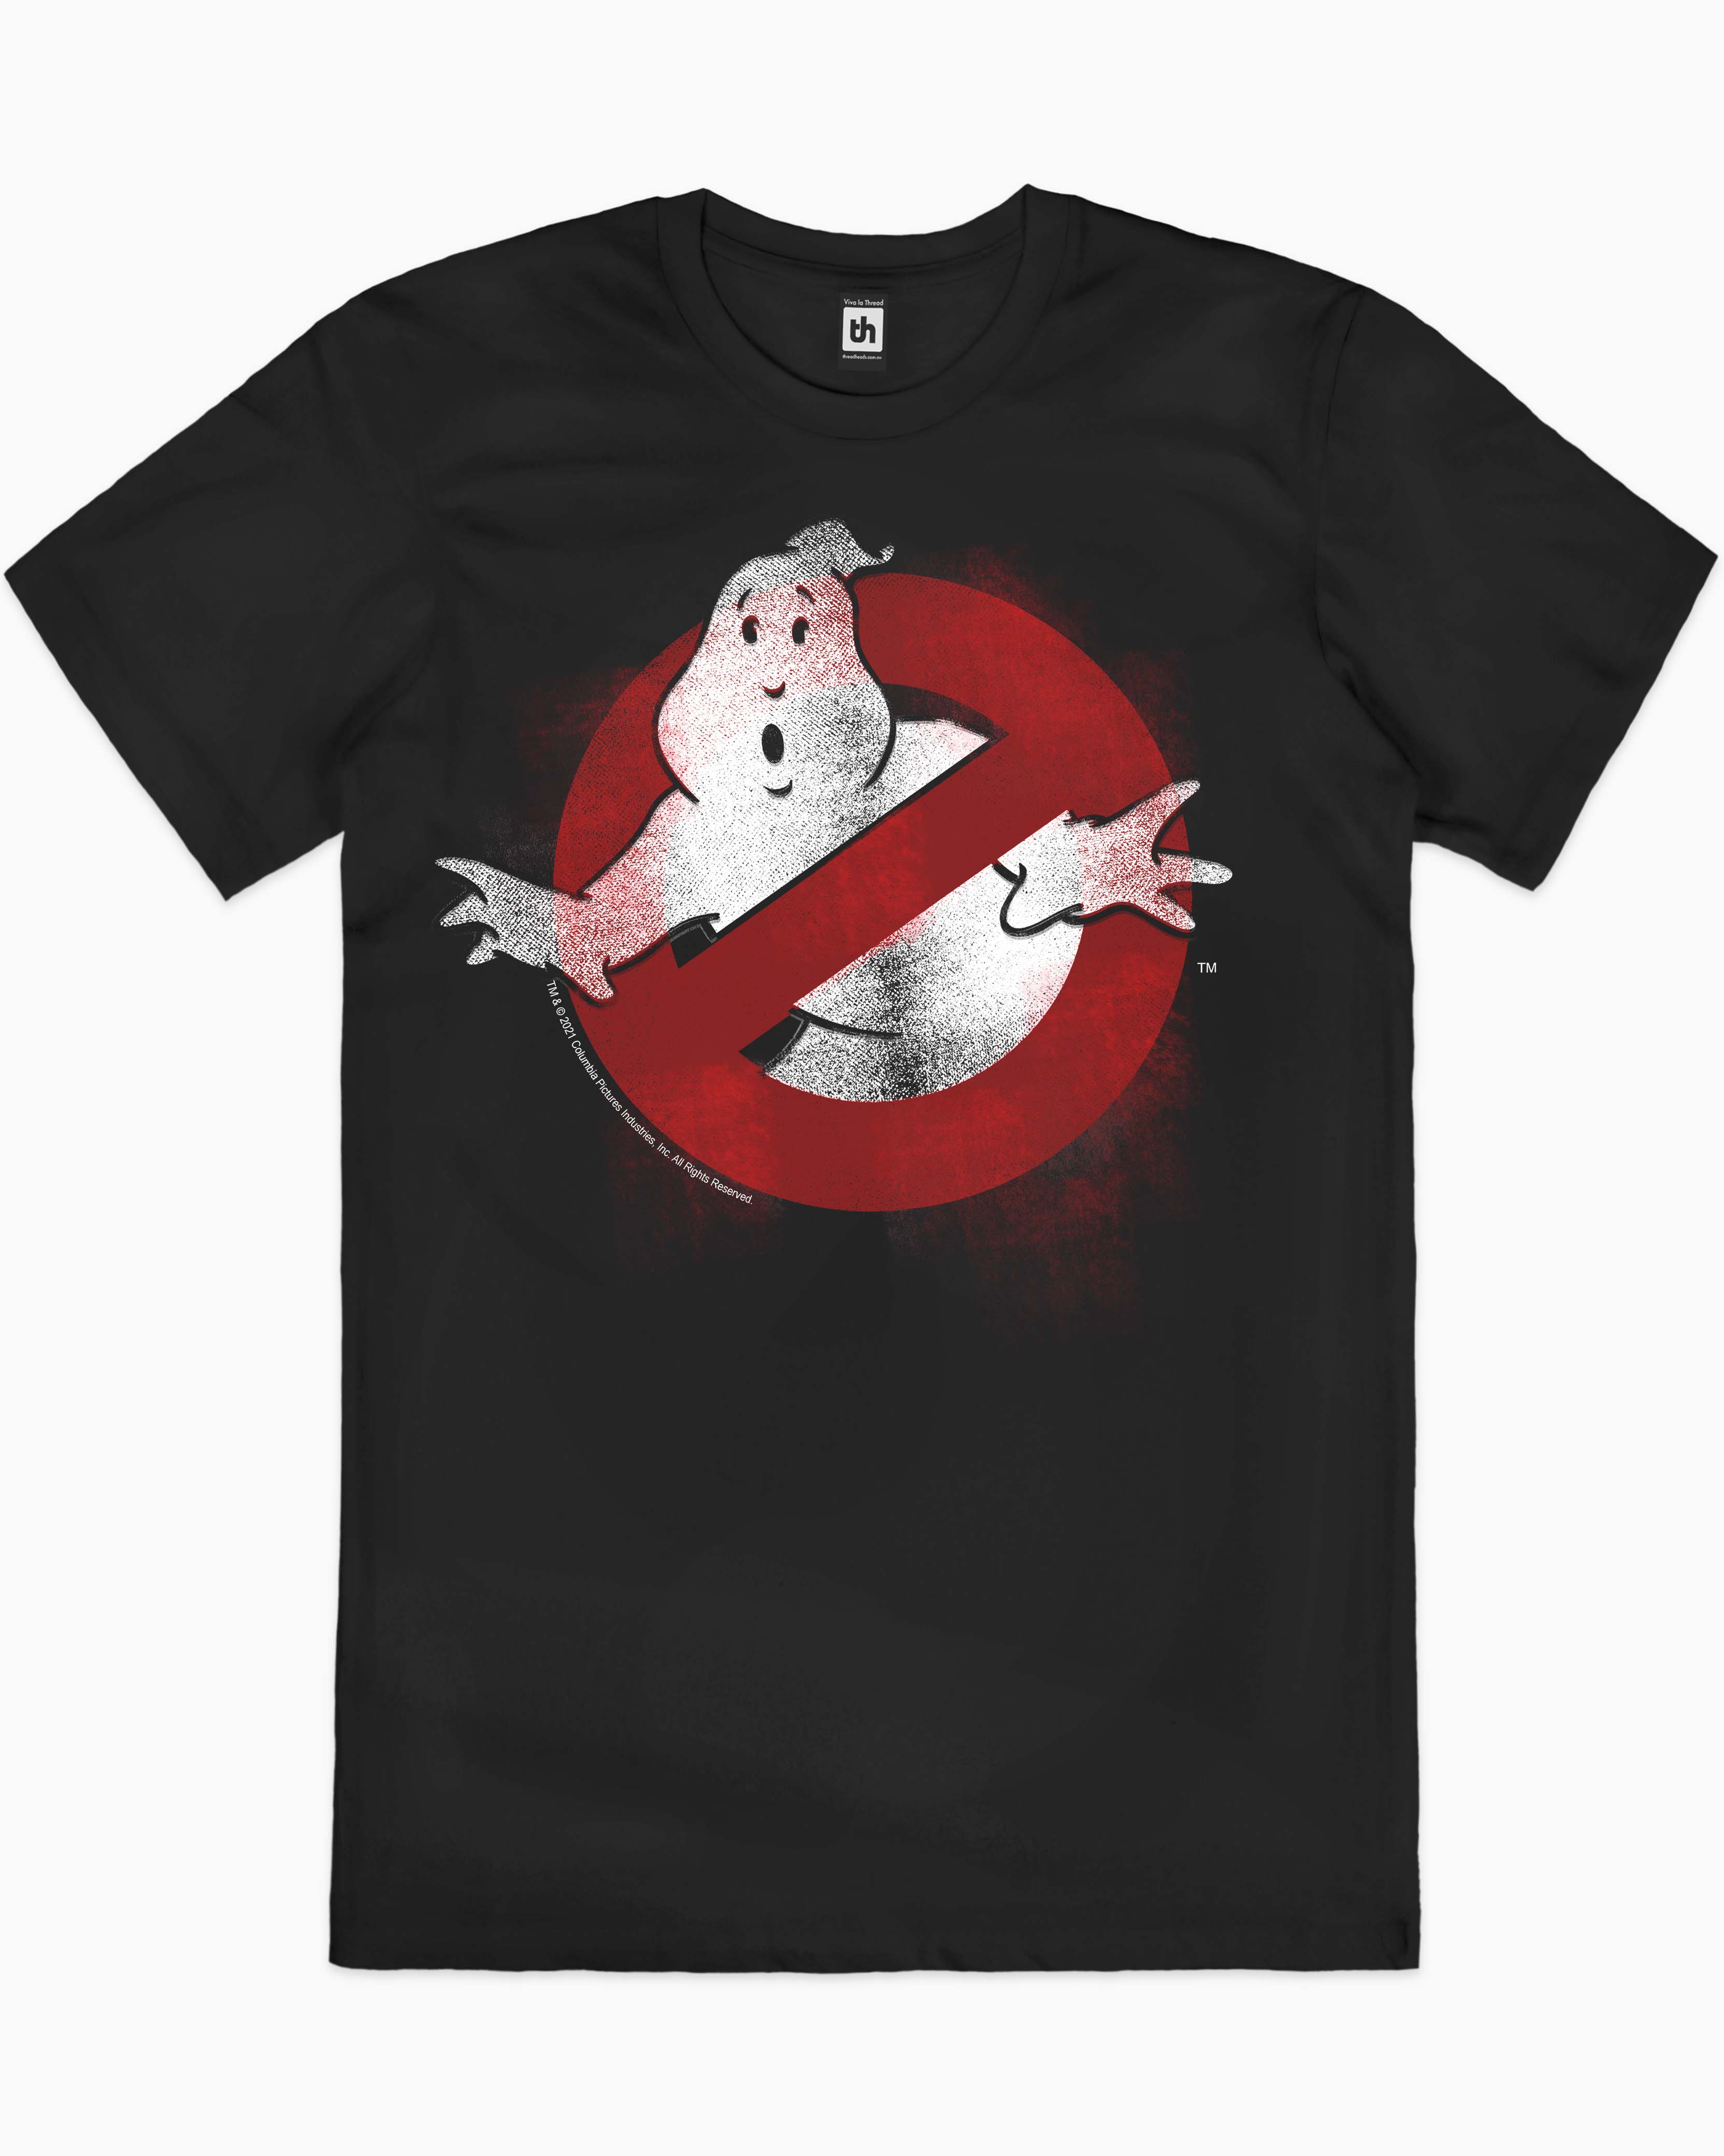 Ghostbusters Logo Distressed T-Shirt